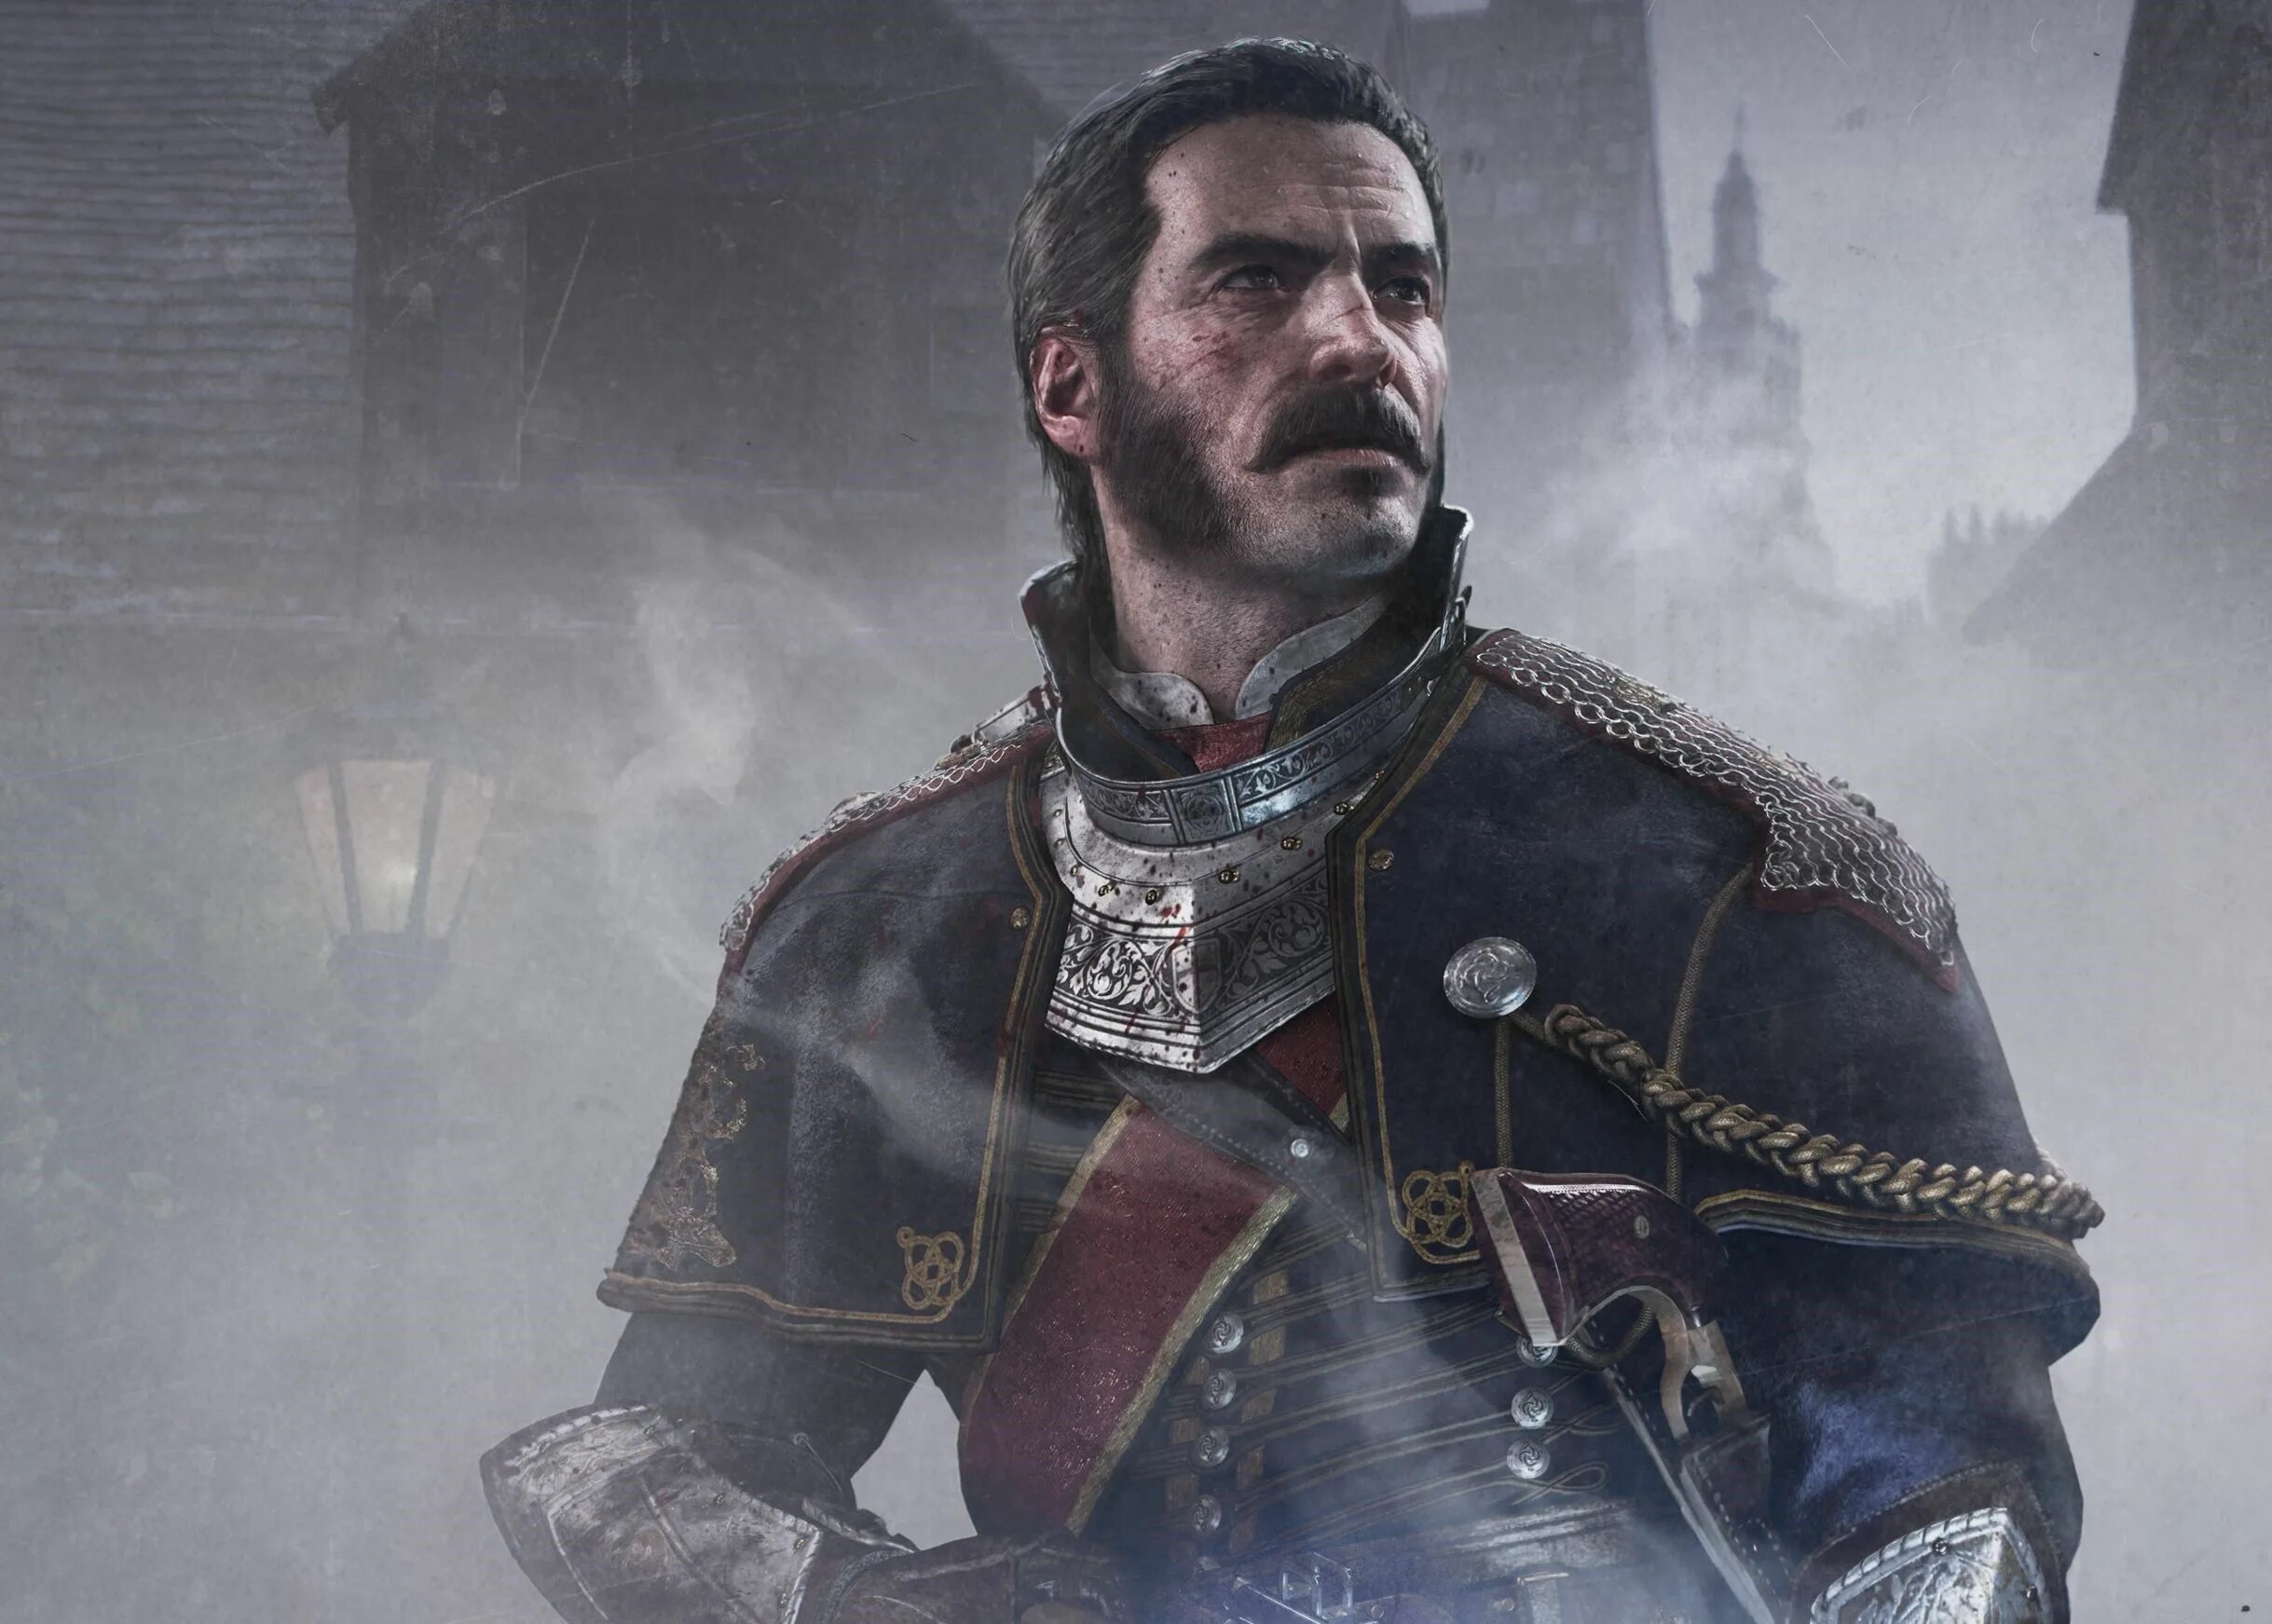 The order: 1886. Игра орден 1886. The order 1886 геймплей. Order 1886 ps4.